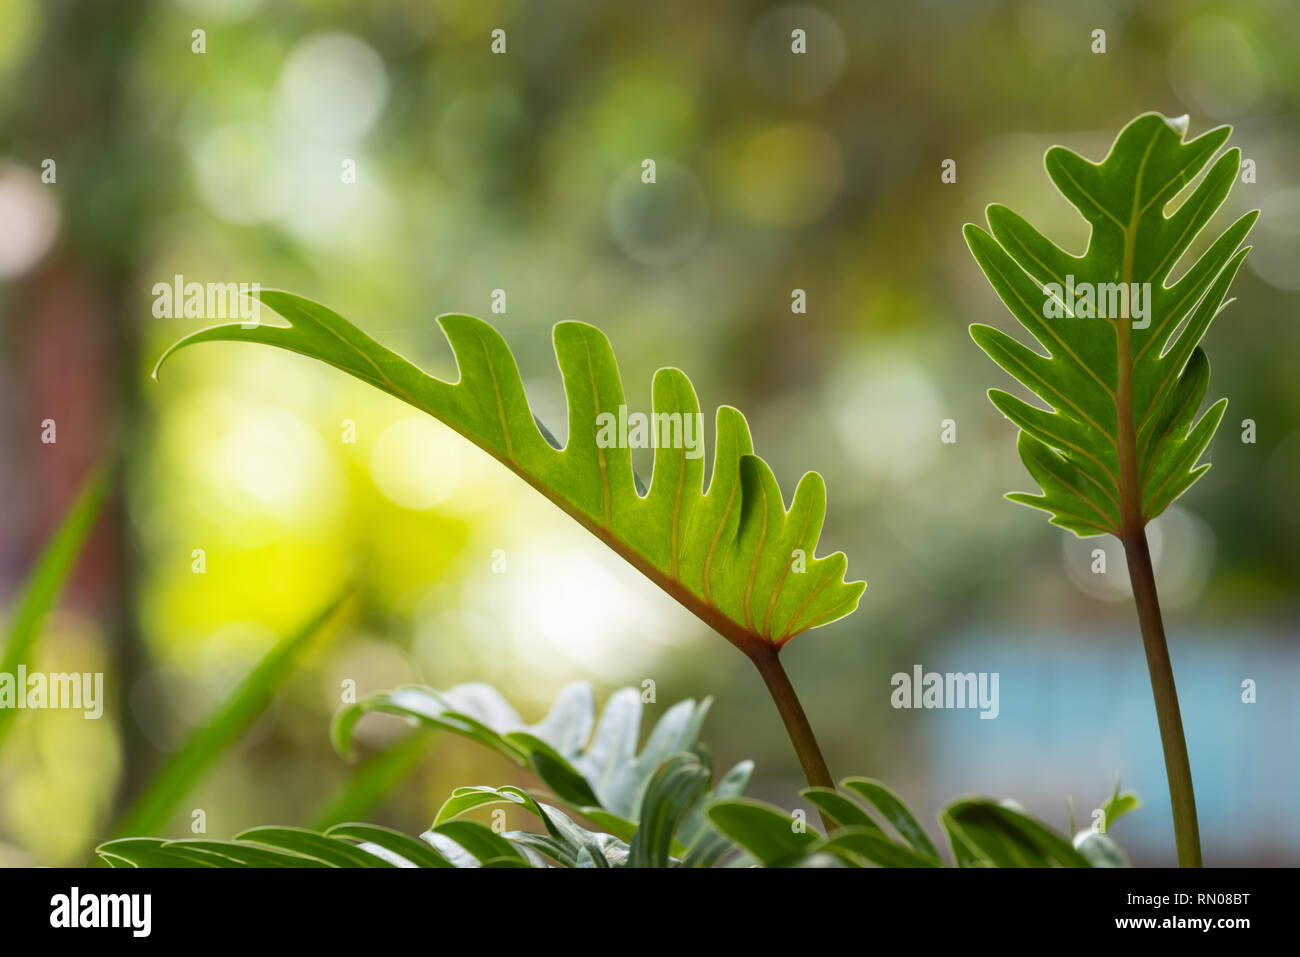 Philodendron,beautiful shape green leaves and healthy foliage over green blurred  background Stock Photo